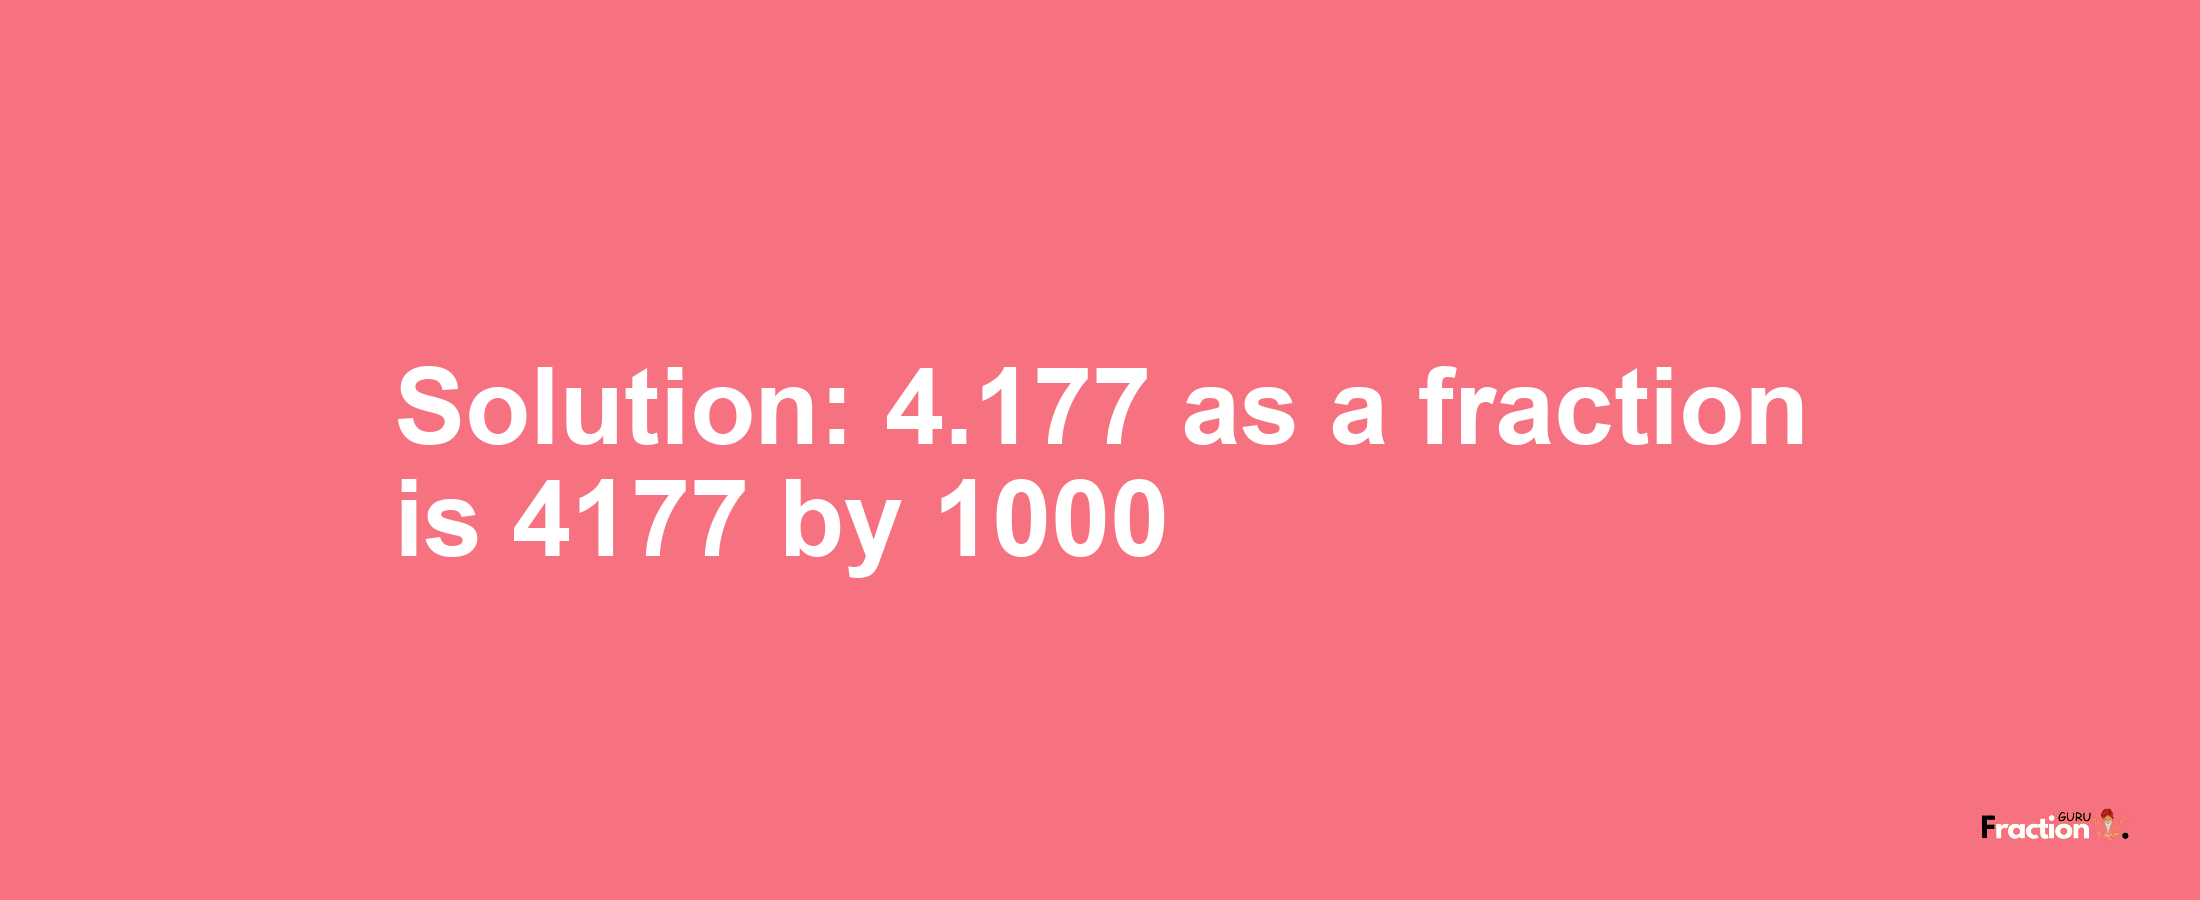 Solution:4.177 as a fraction is 4177/1000